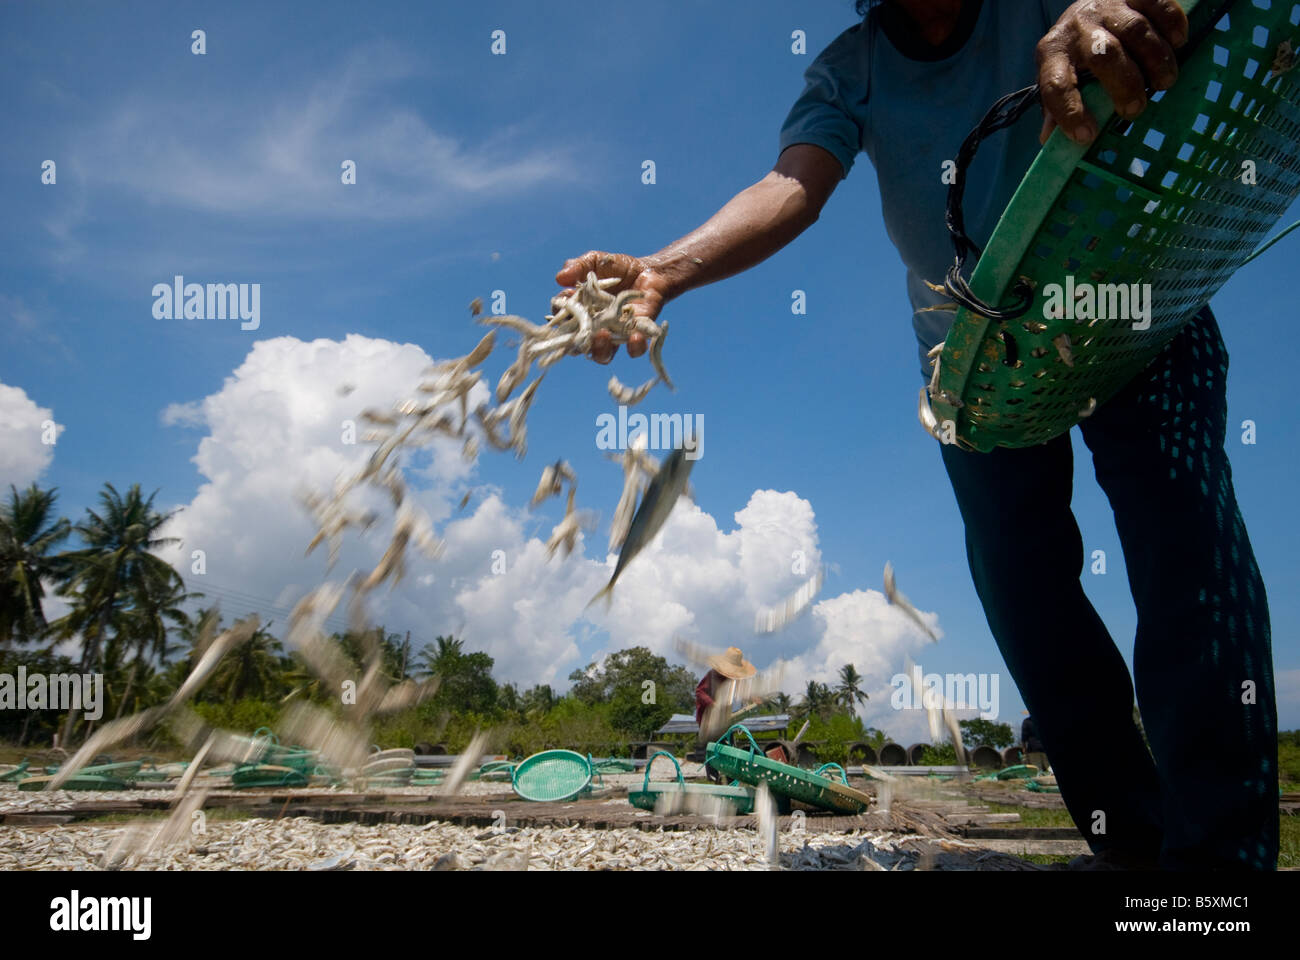 Traditional method of drying anchovies in Terengganu Malaysia Stock Photo